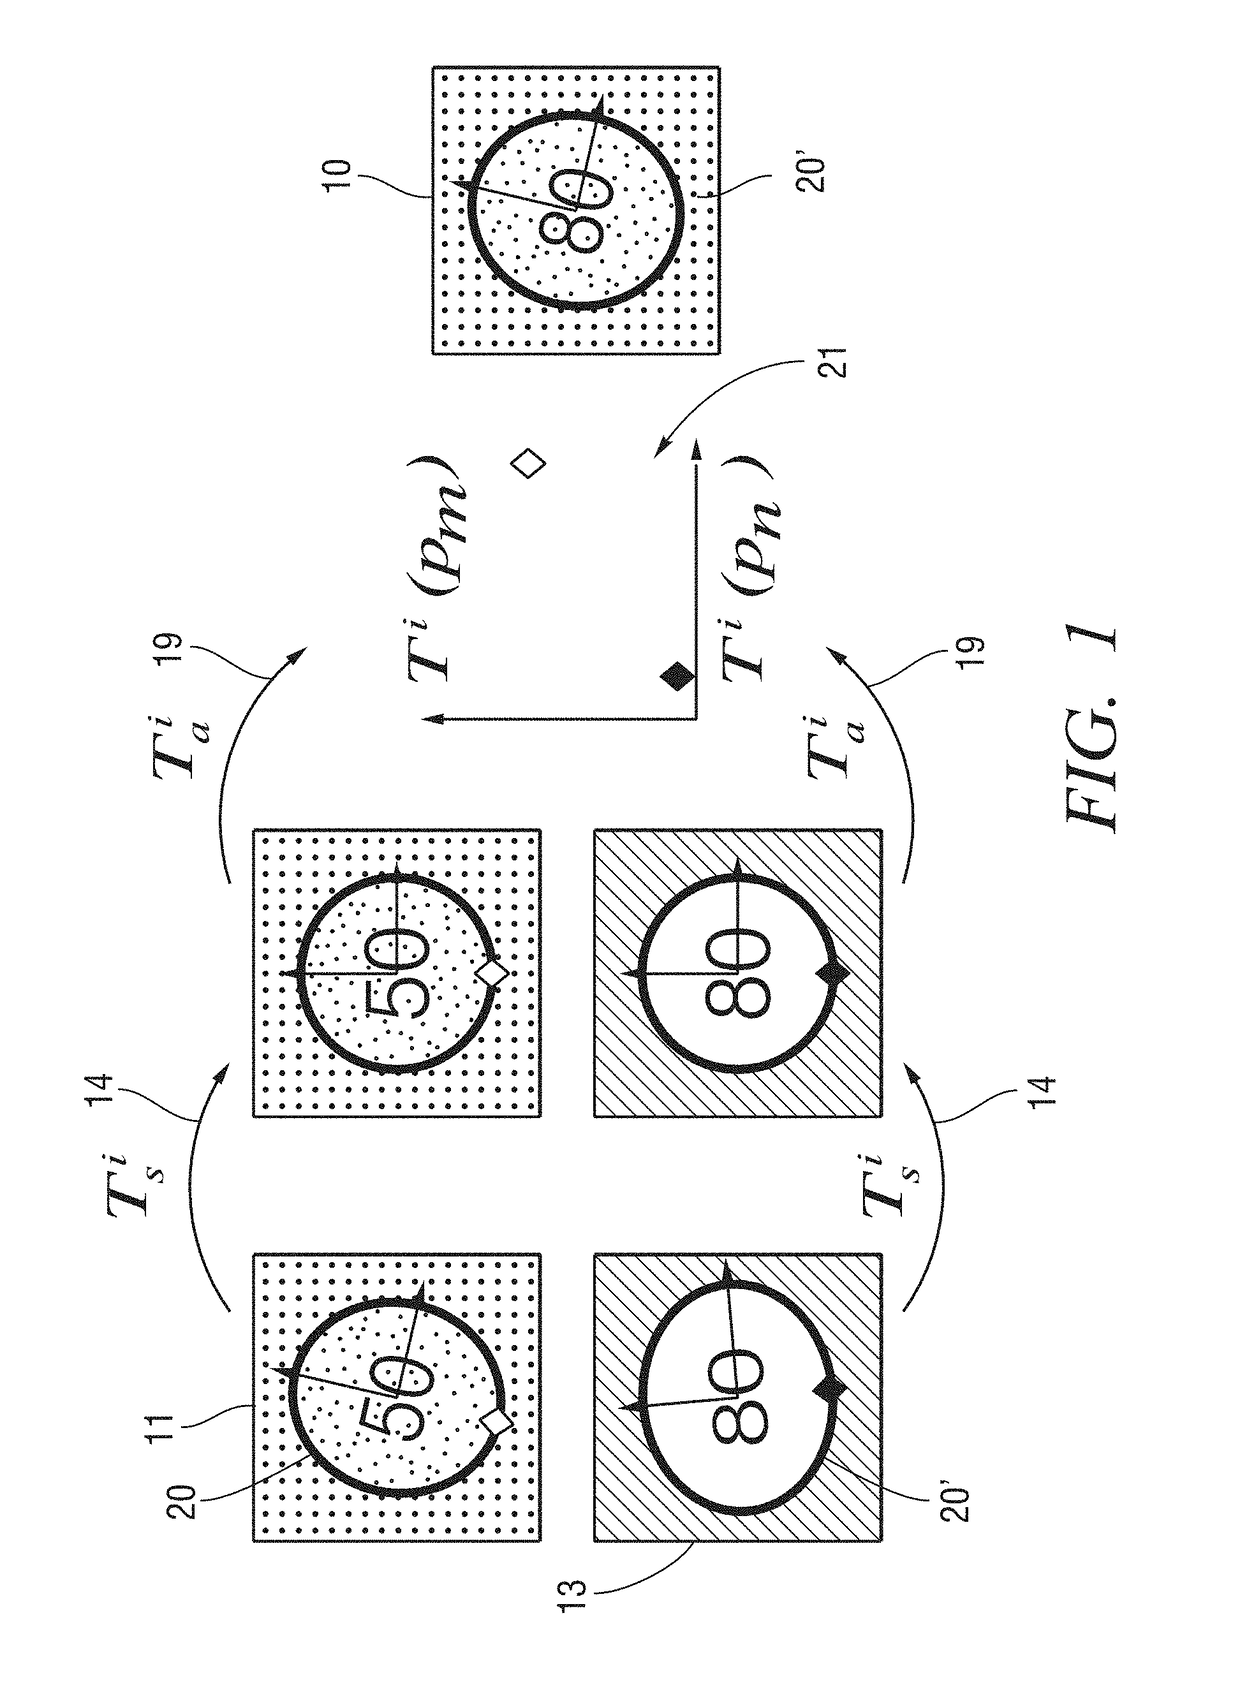 Method of generating a training image for an automated vehicle object recognition system